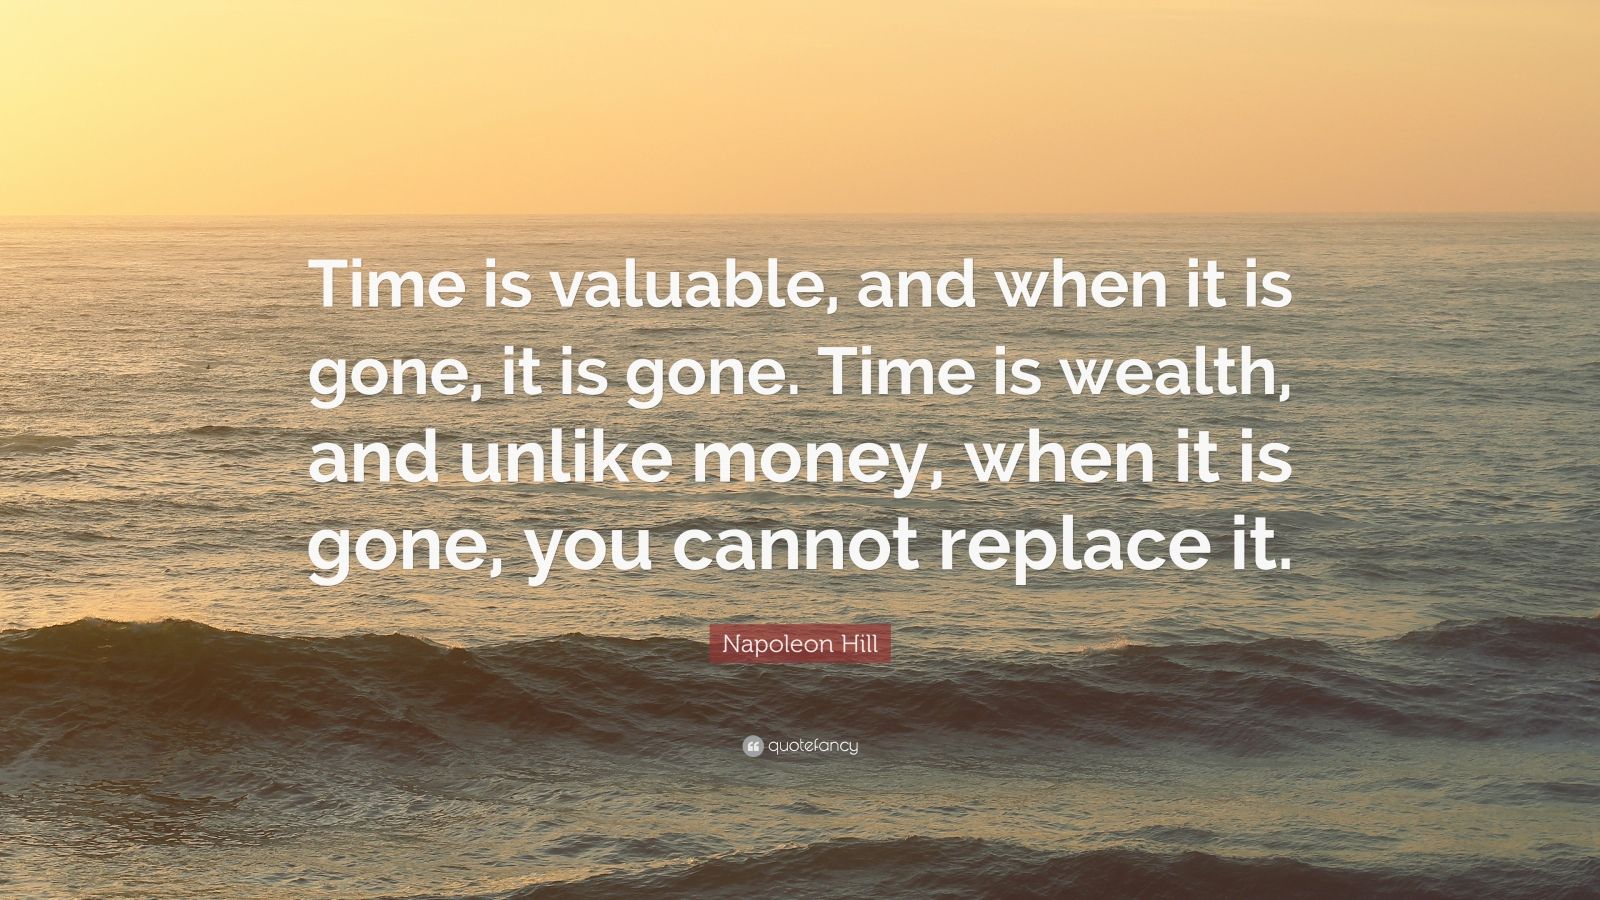 Napoleon Hill Quote: “Time is valuable, and when it is gone, it is gone